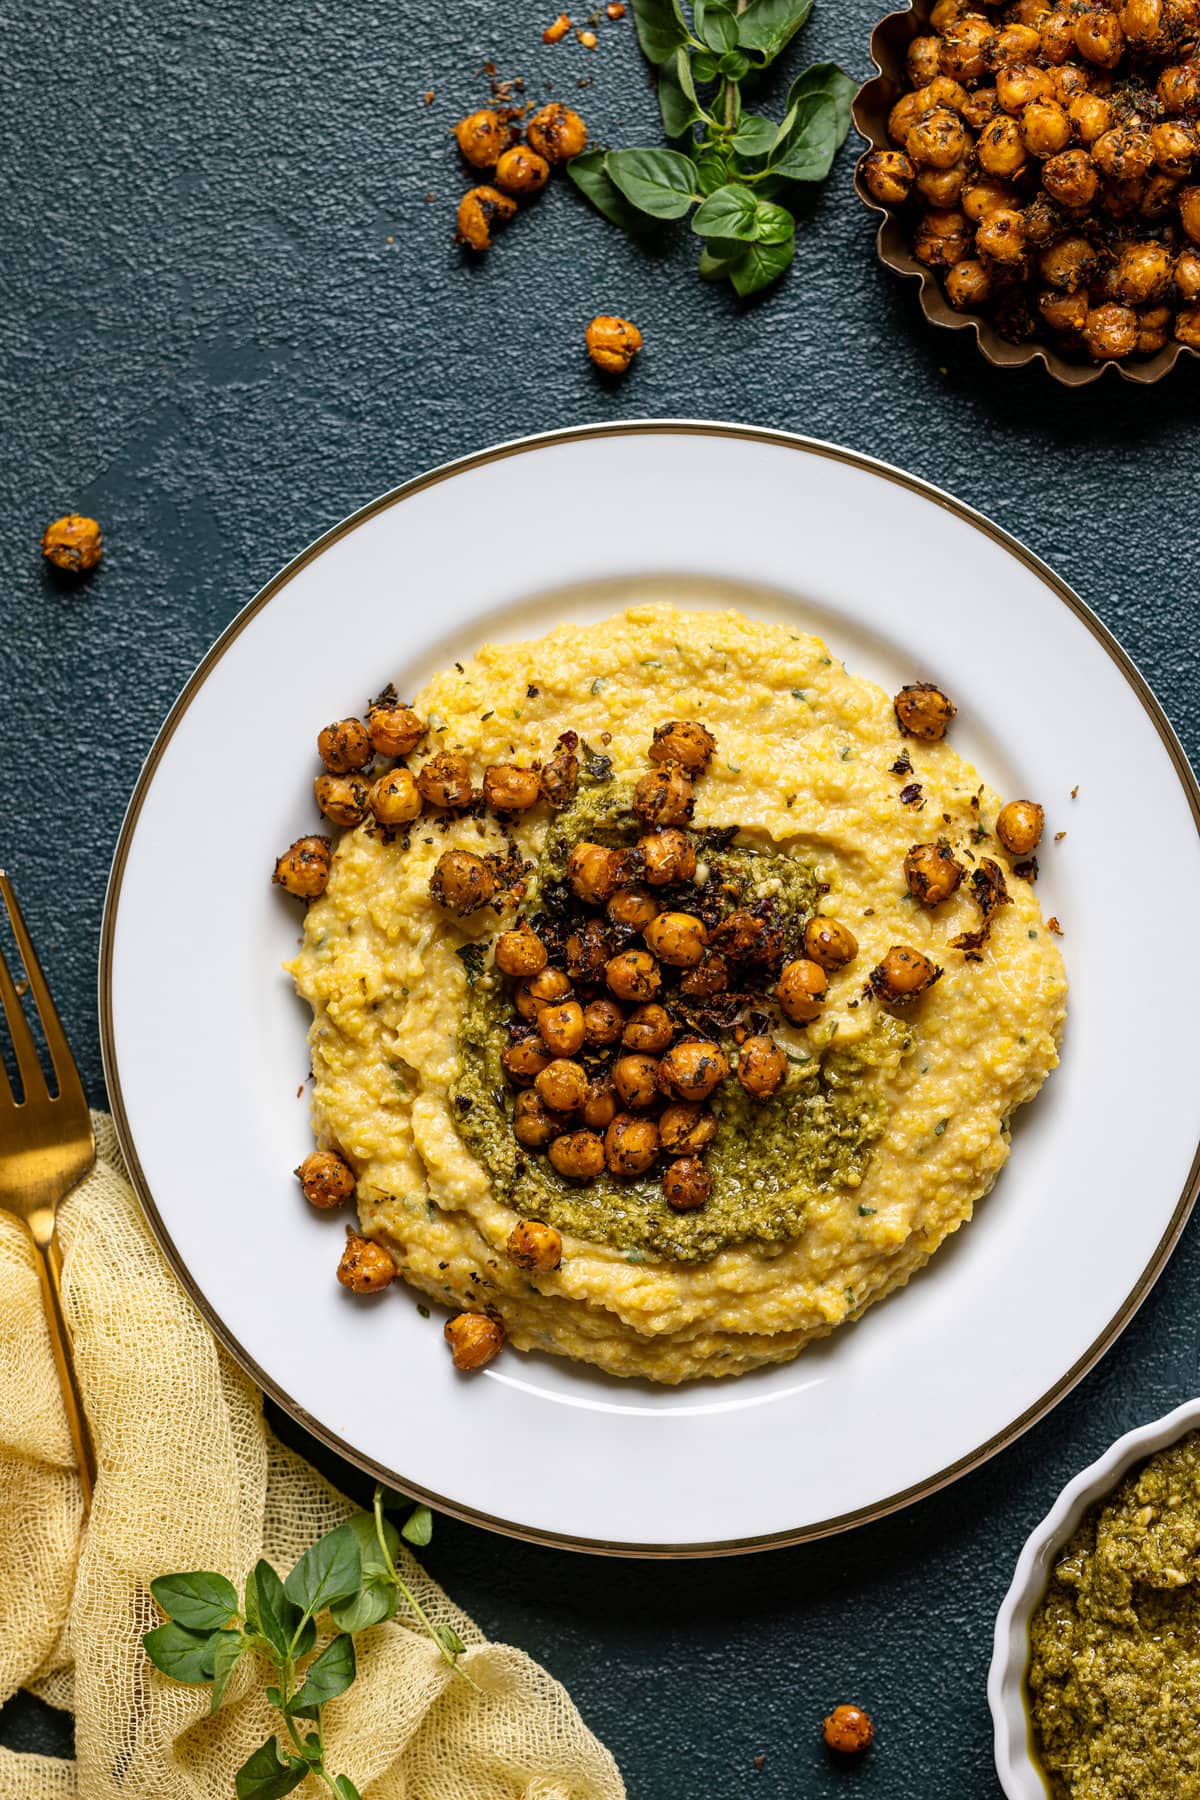 Plate of Vegan Cheese Polenta with Pesto and Chickpea